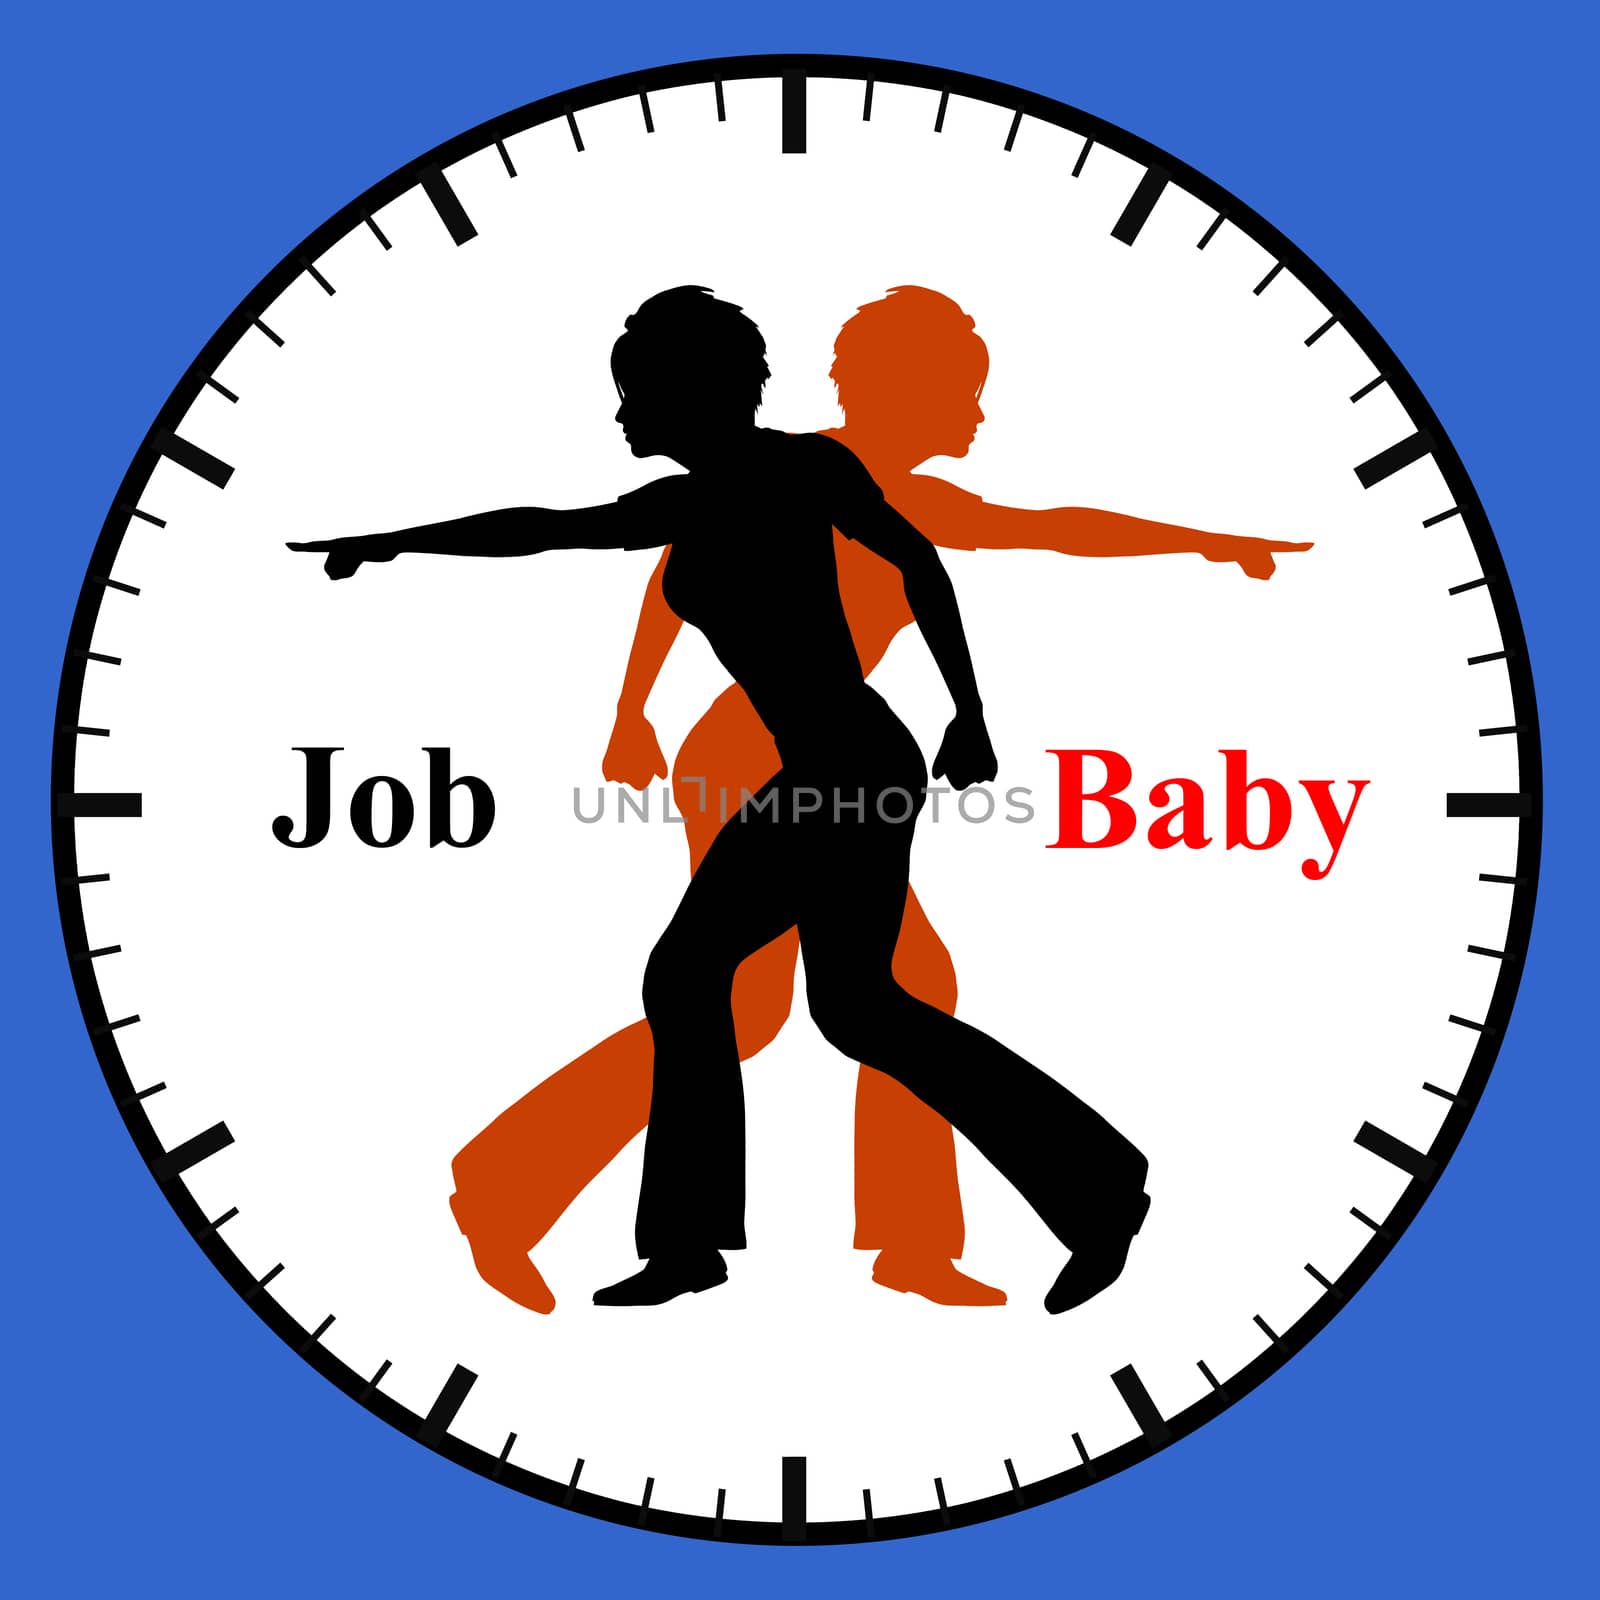 Conflict of compatibility of having a baby and work